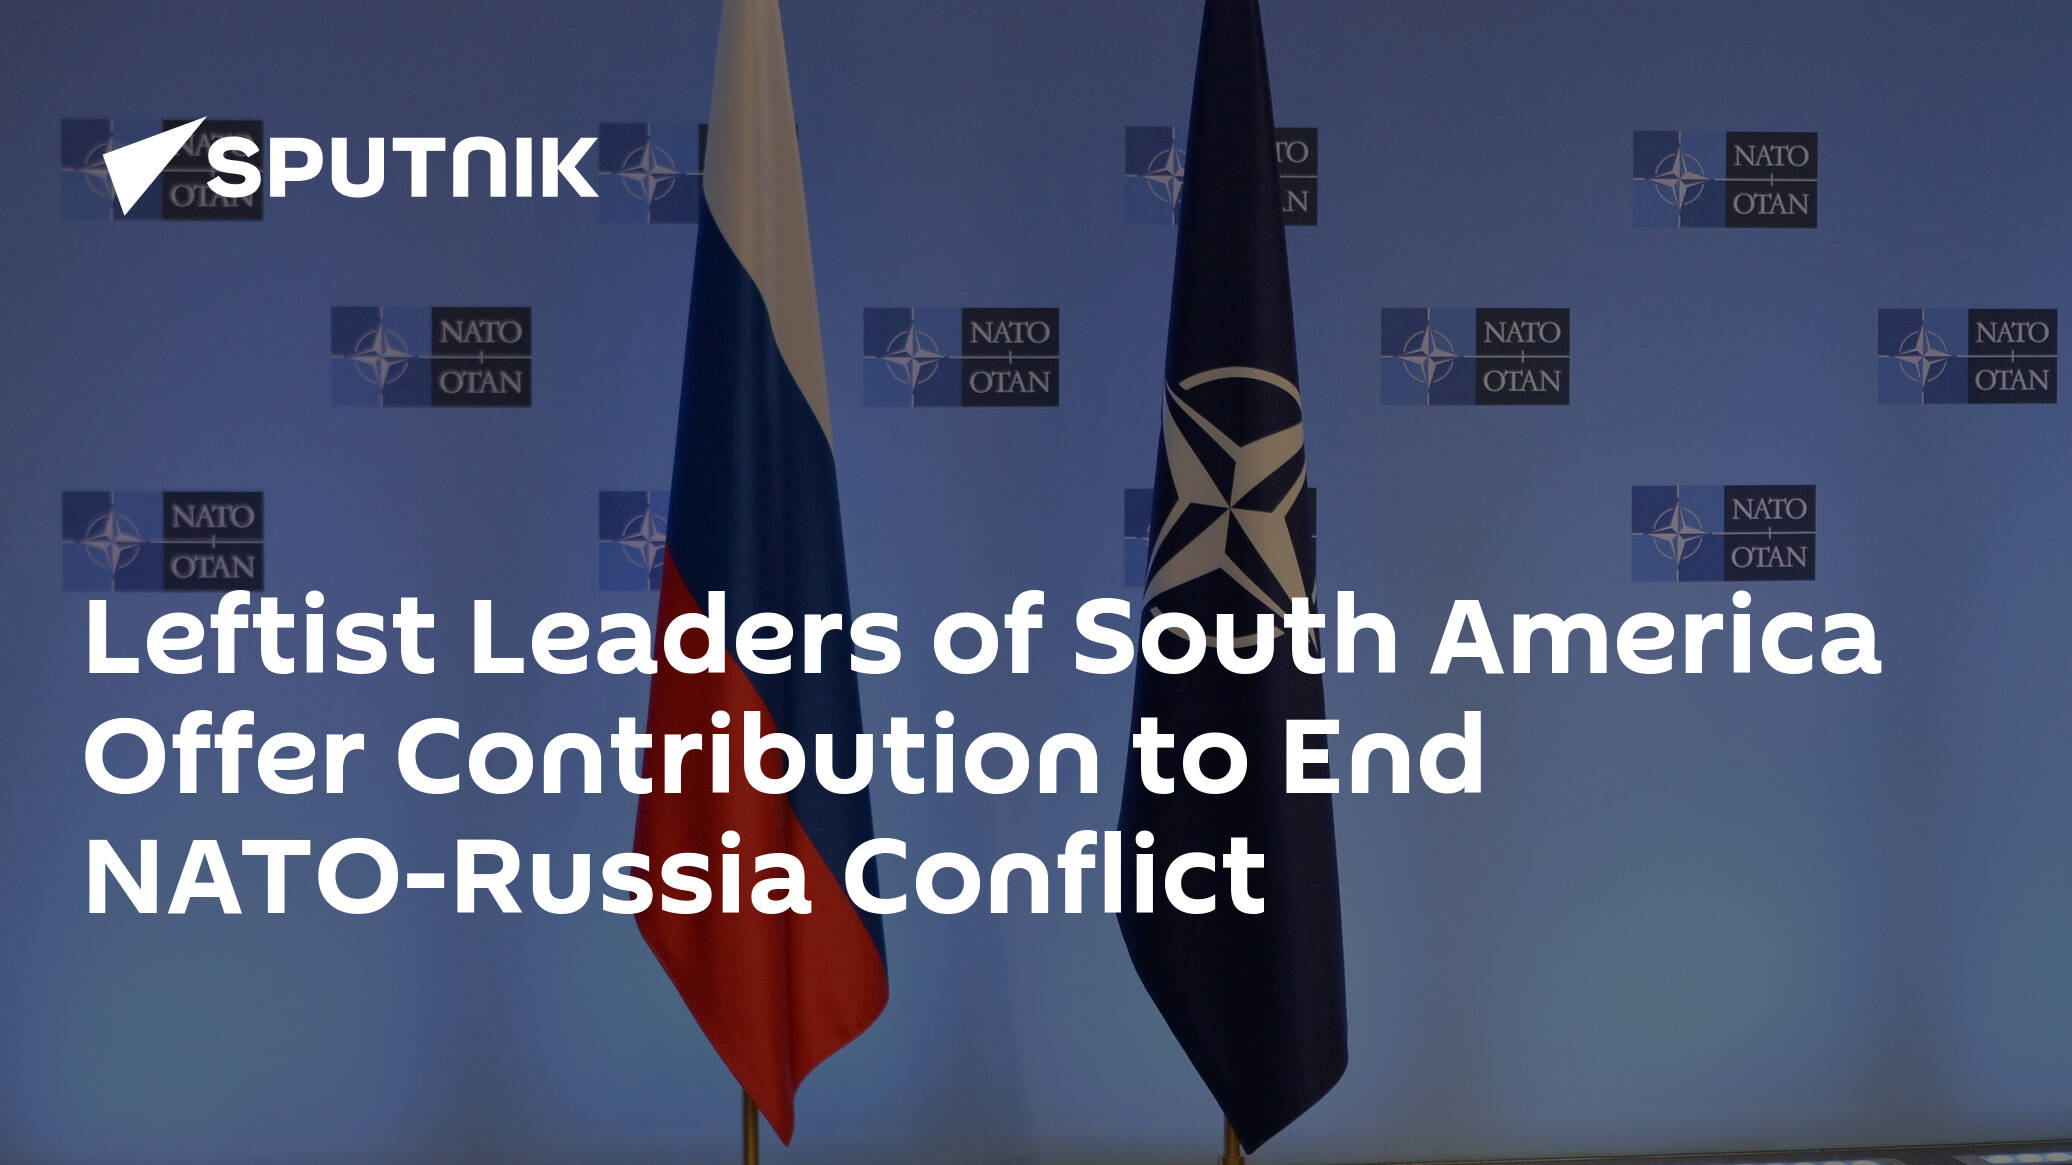 Leftist Leaders of South America Offer Contribution to End NATO-Russia Conflict